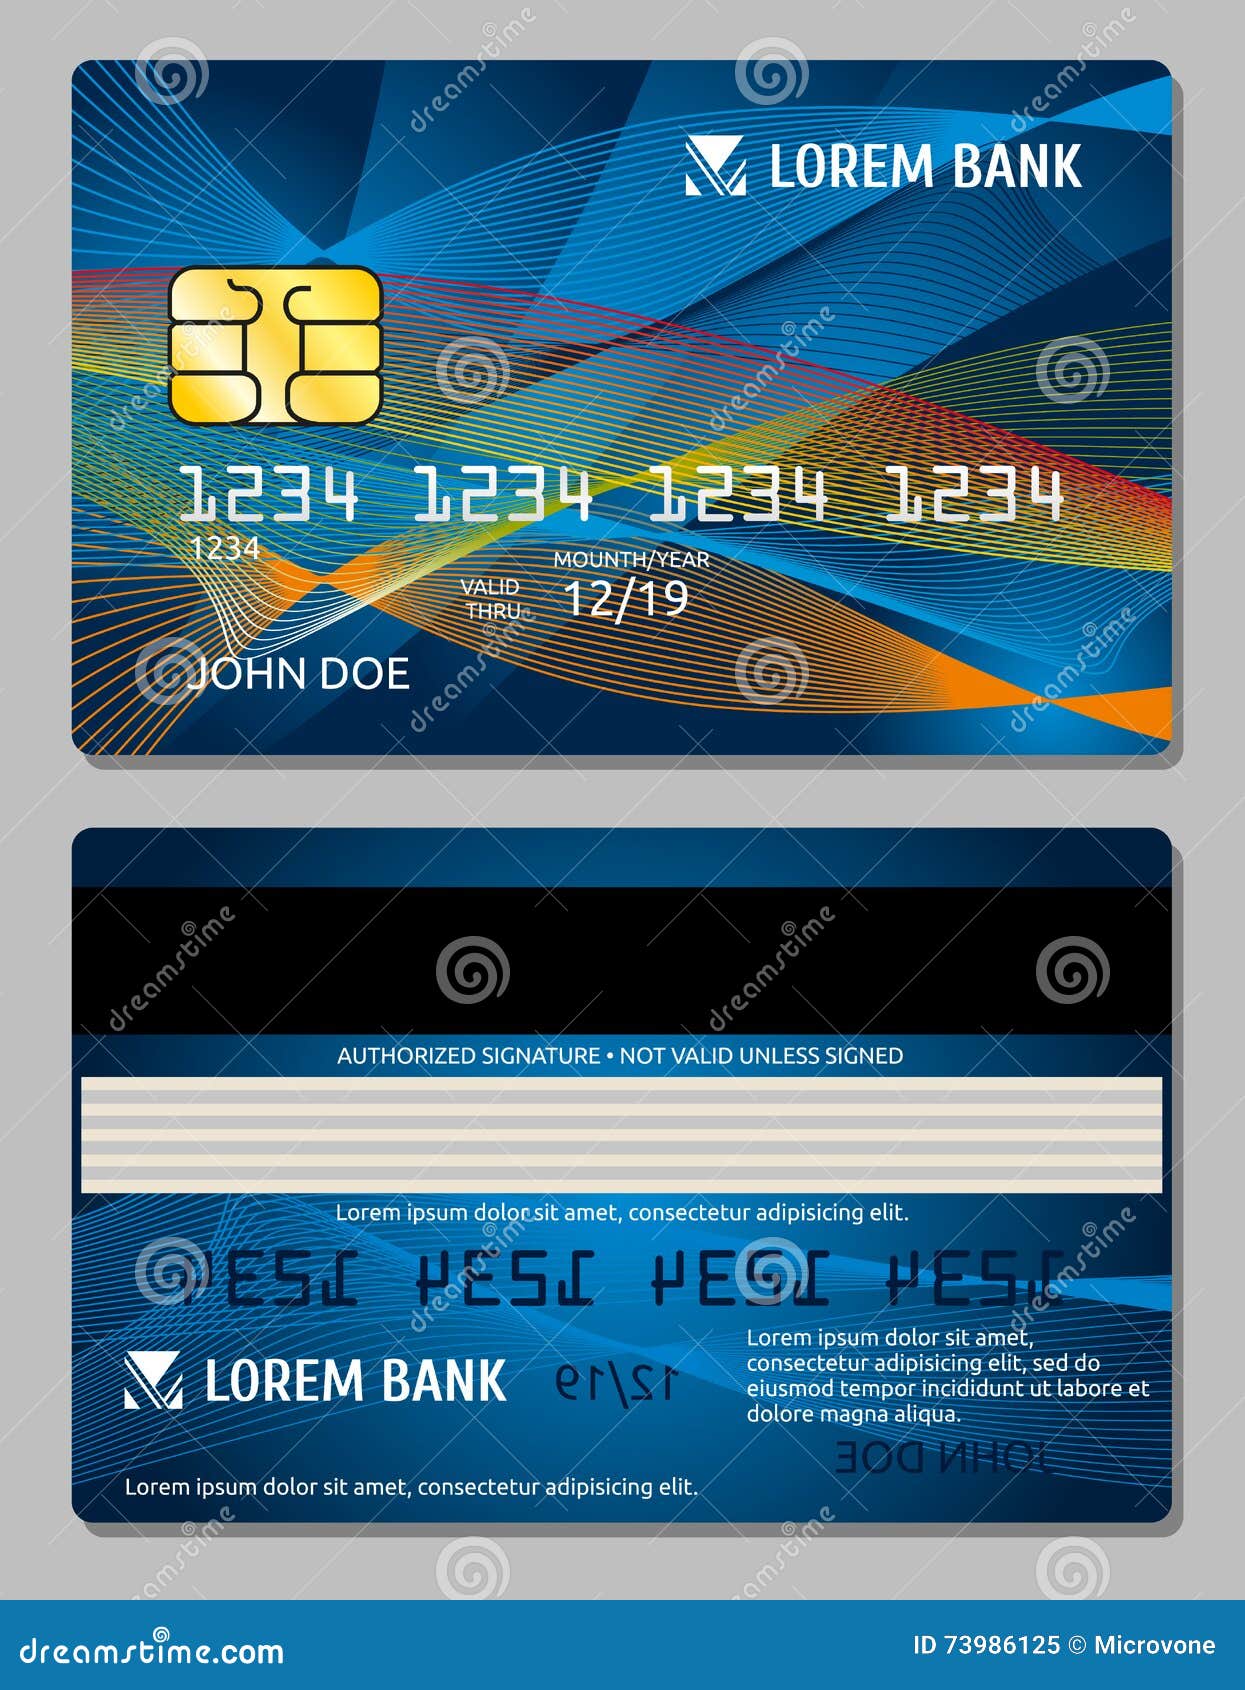 Credit Cards Design Vector Template Stock Vector - Illustration of ...